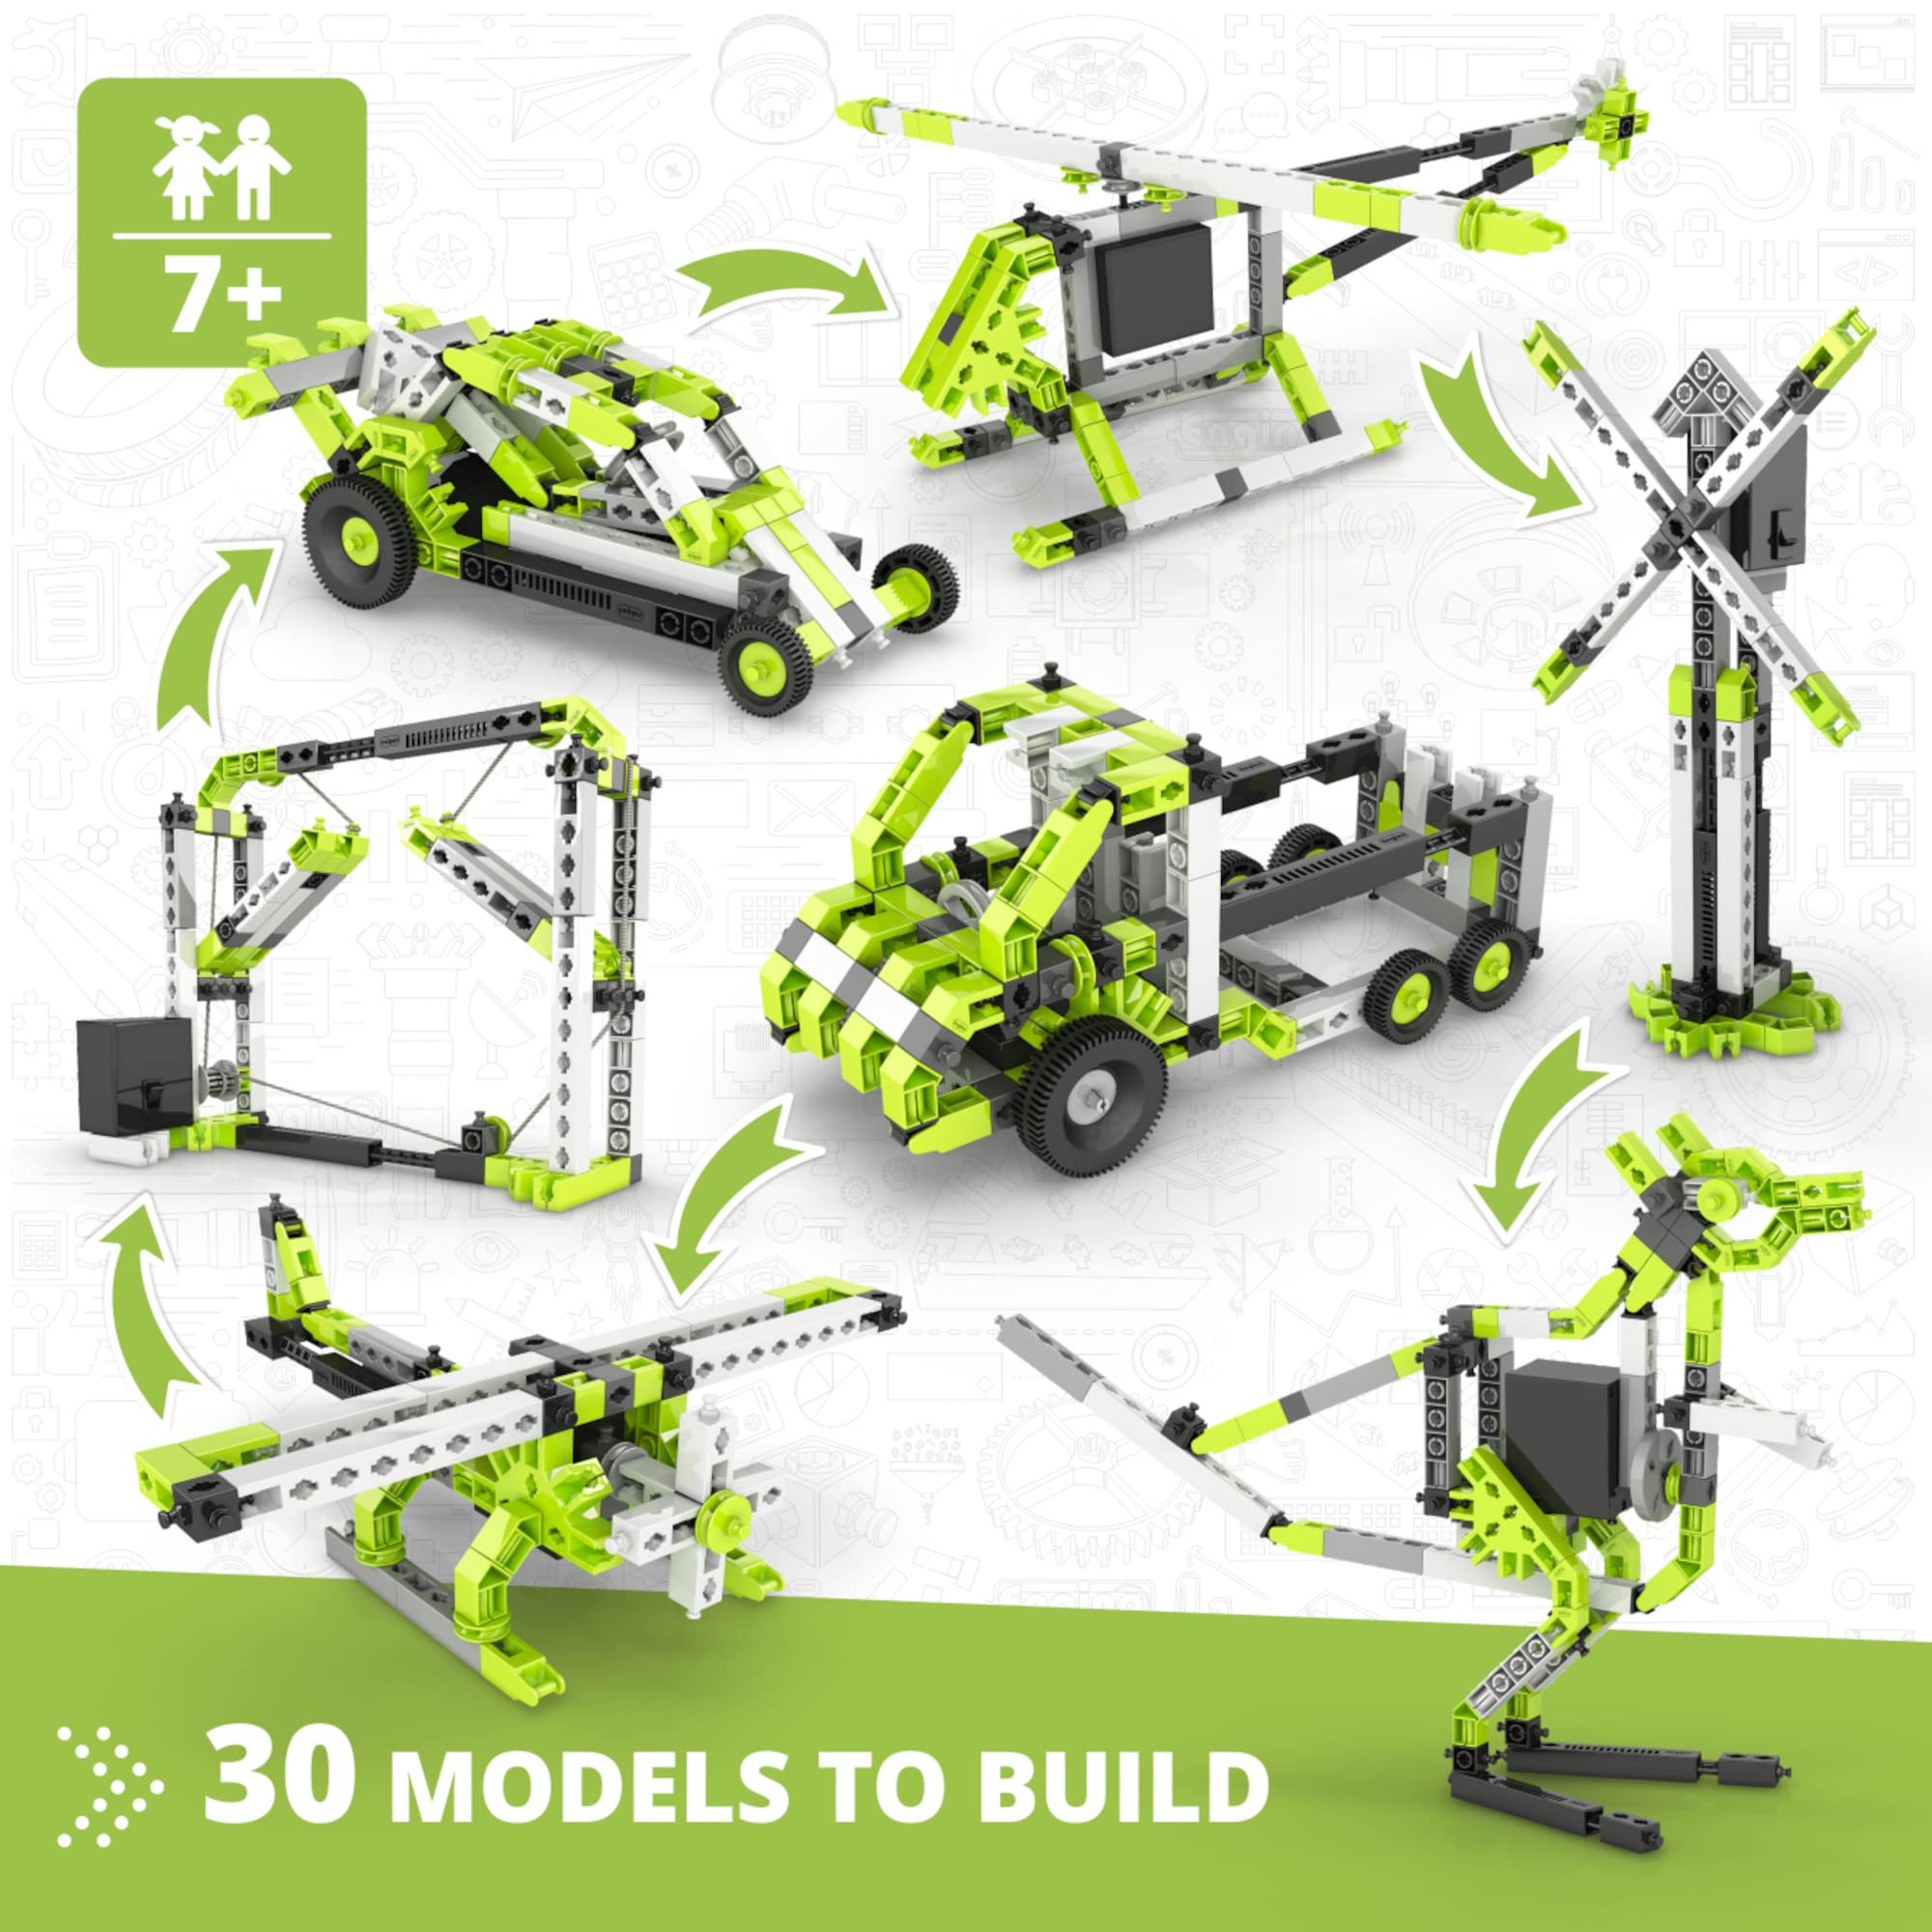 Engino Inventor - 30-IN-ONE |BUILD 30 Motorized Models | Assemble Drag Racer, Drawbridge, Truck , T-Rex, Helicopter, Elevator and so much more | STEM Construction Kit